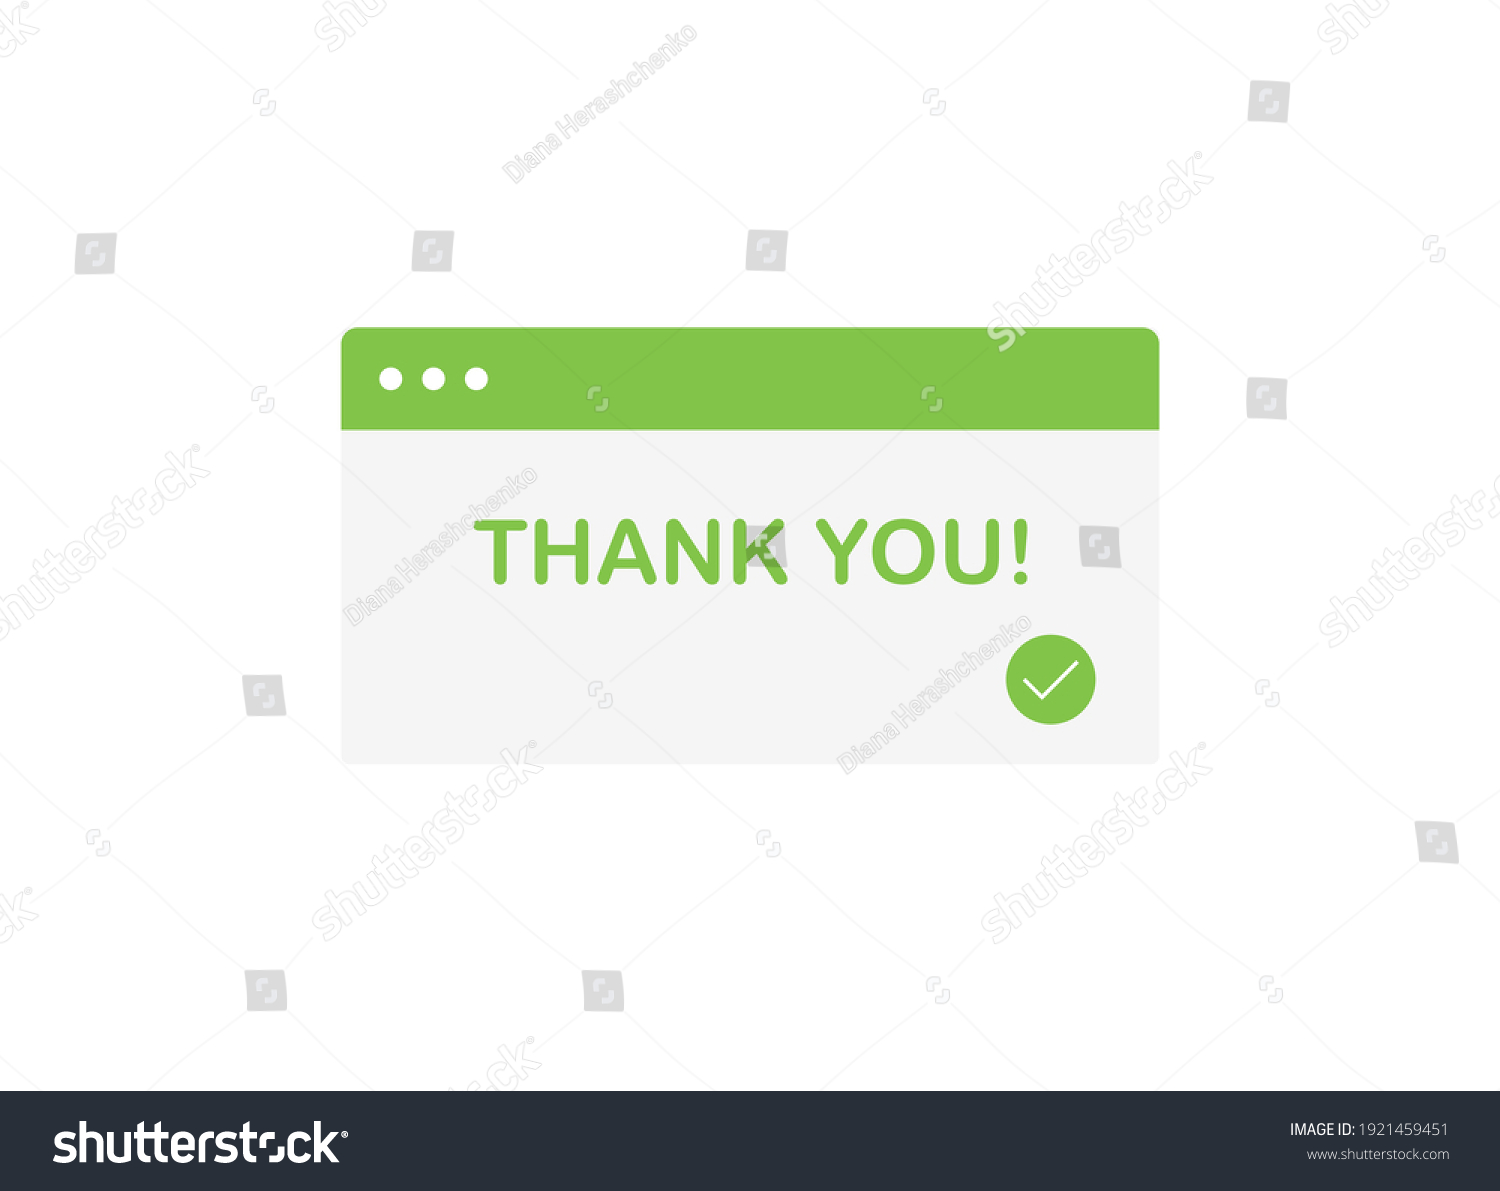 SVG of Vector illustration Thank you popup for your purchase. Order confirmed. The payment was successful. Flat design on white background. Green. Eps 10 svg